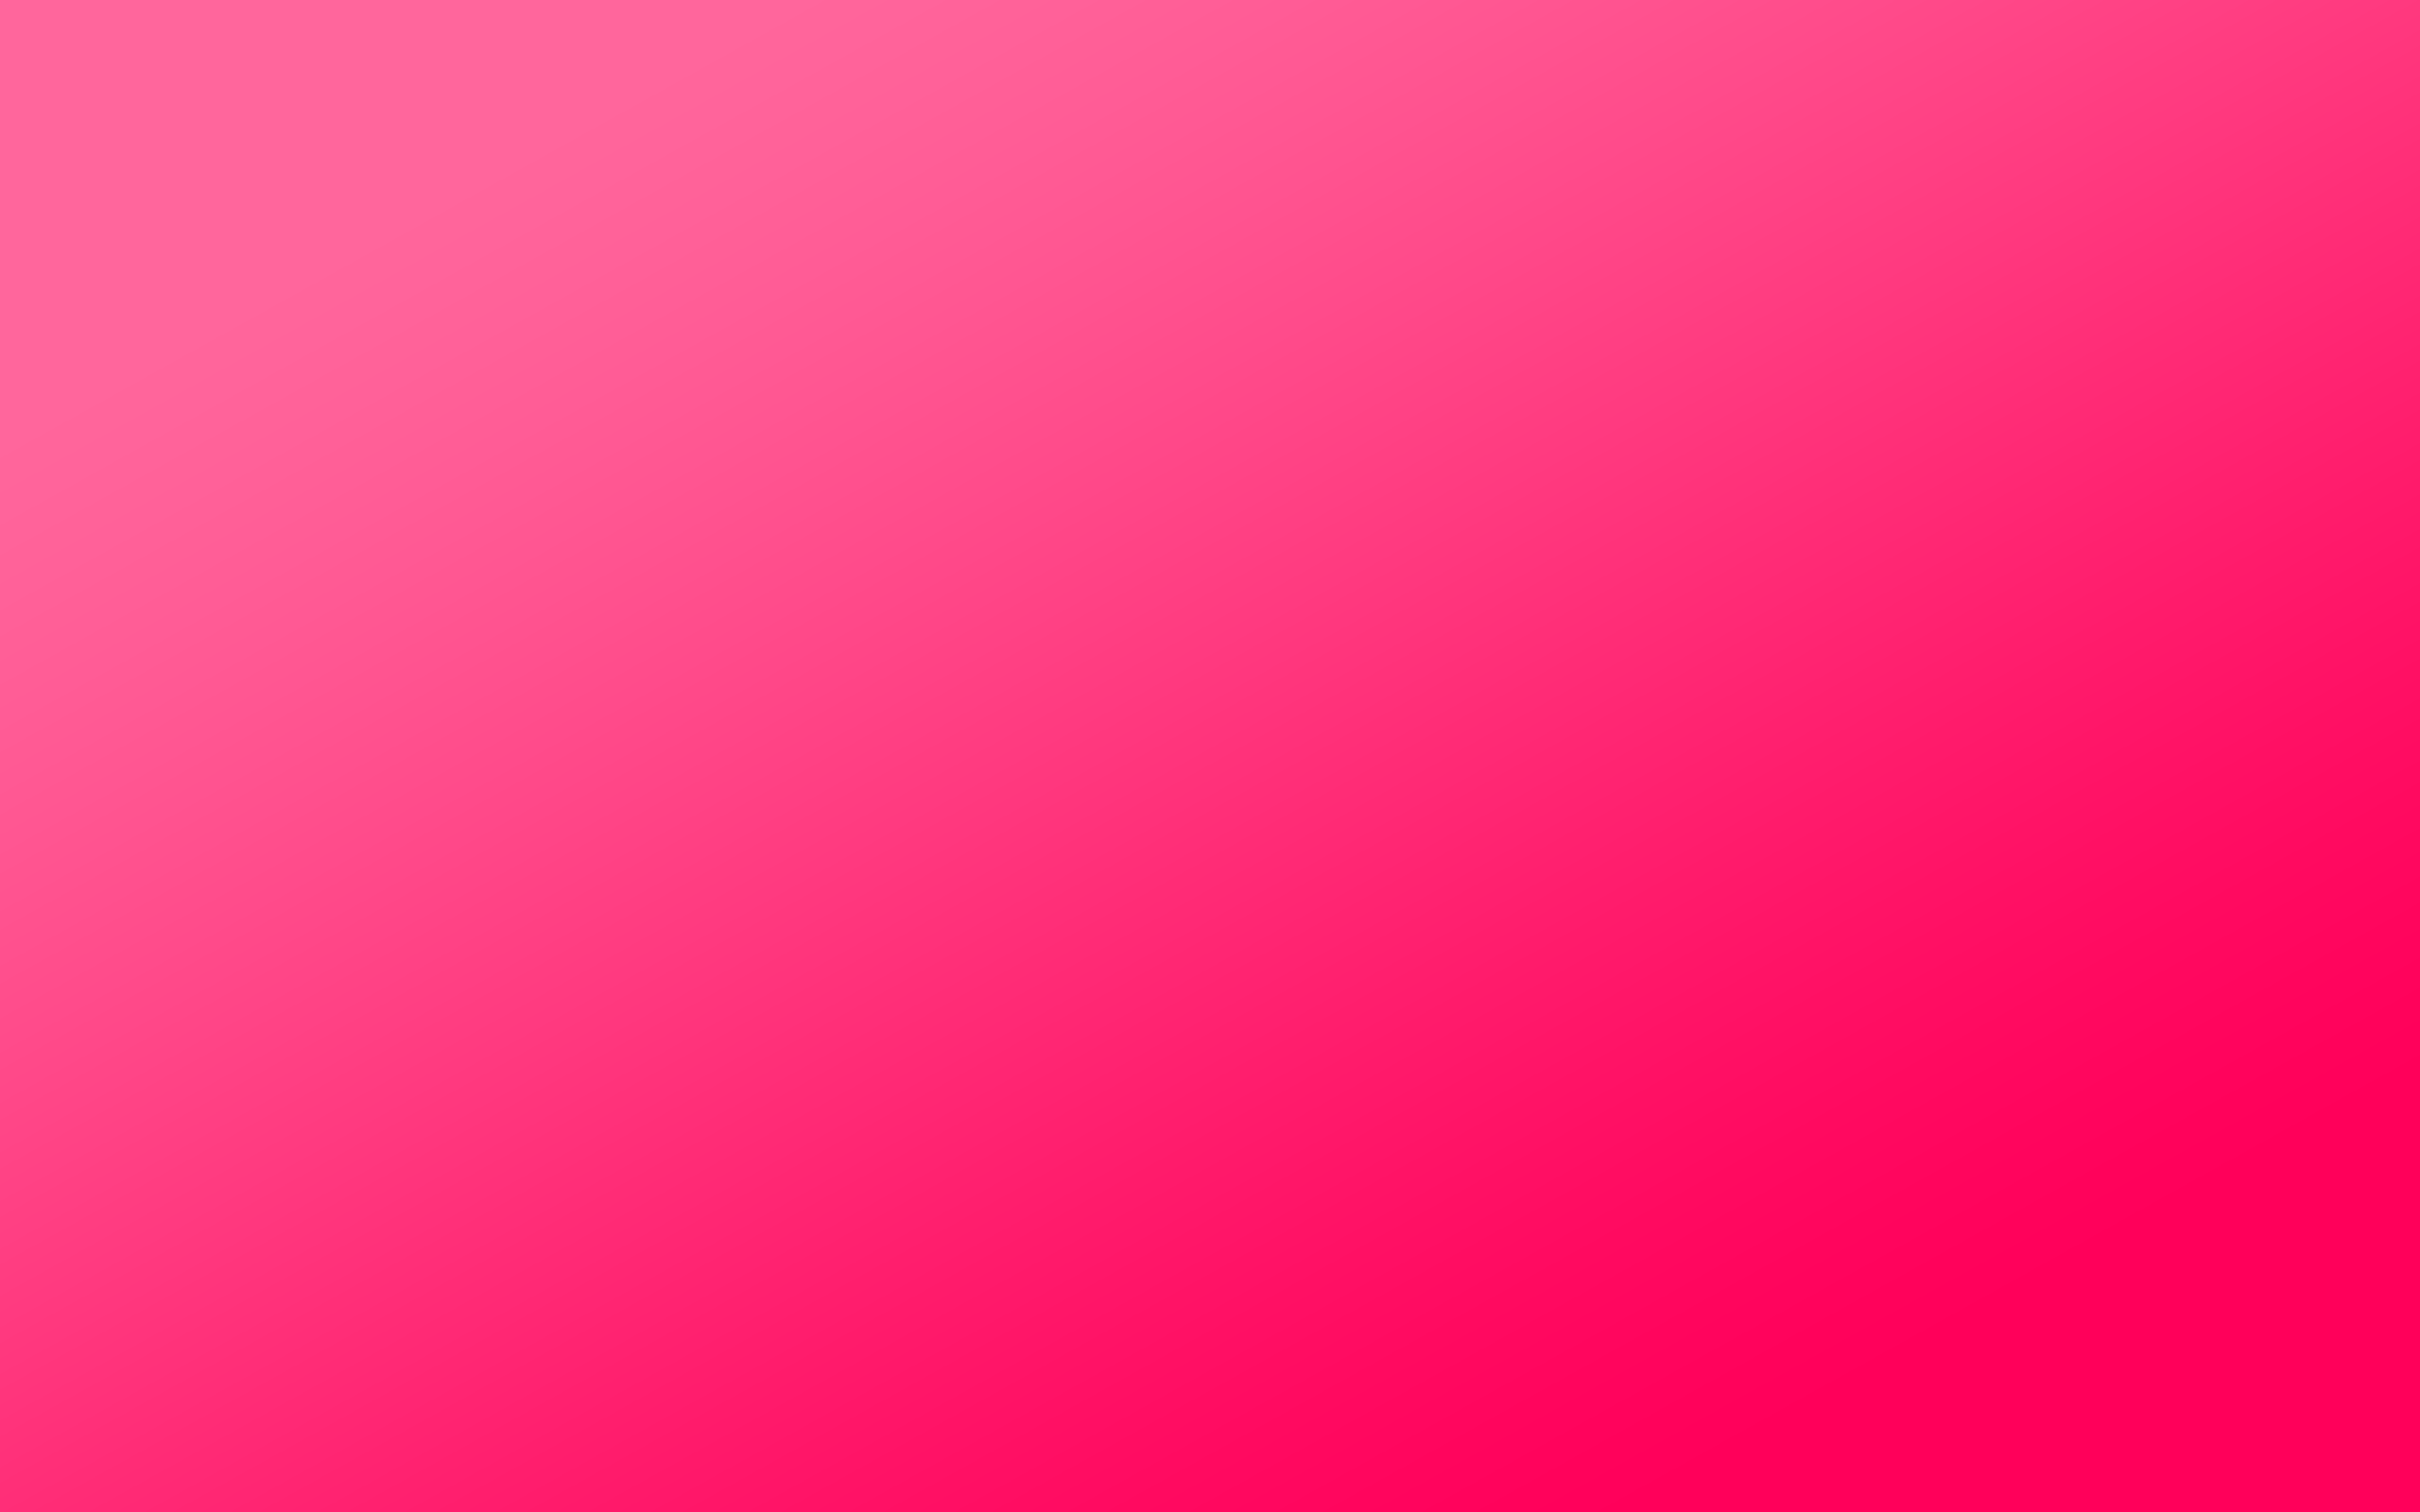 Pink Image For Backgrounds - Wallpaper Cave